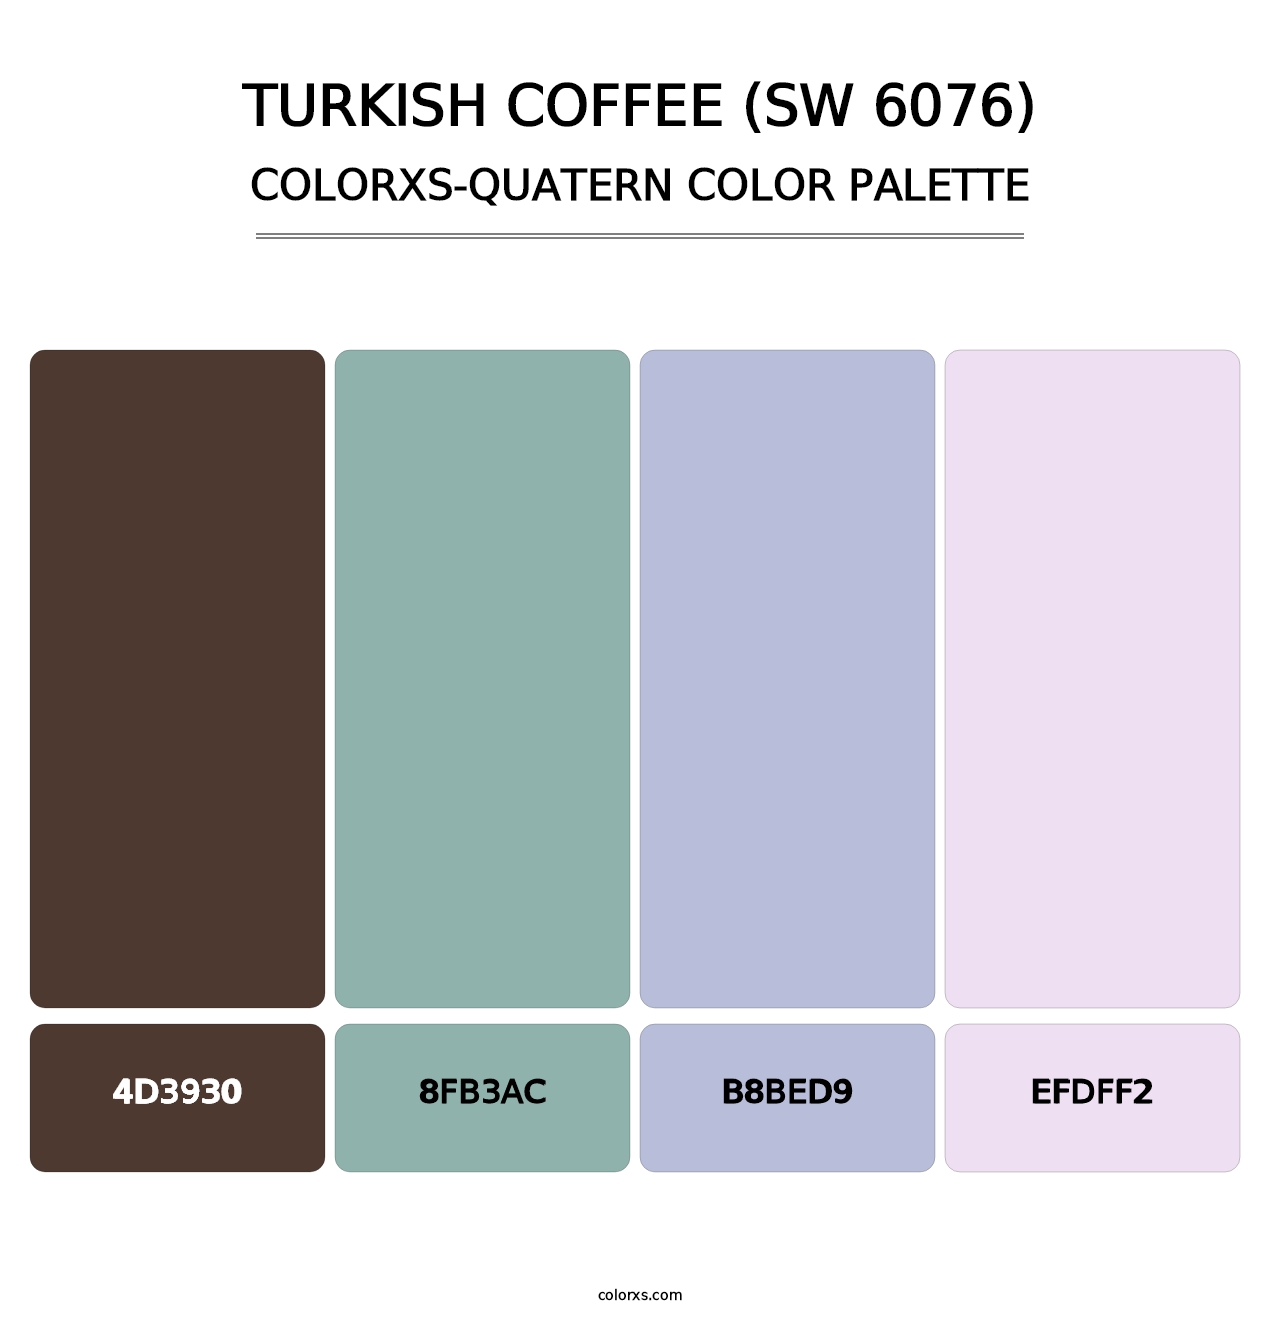 Turkish Coffee (SW 6076) - Colorxs Quatern Palette